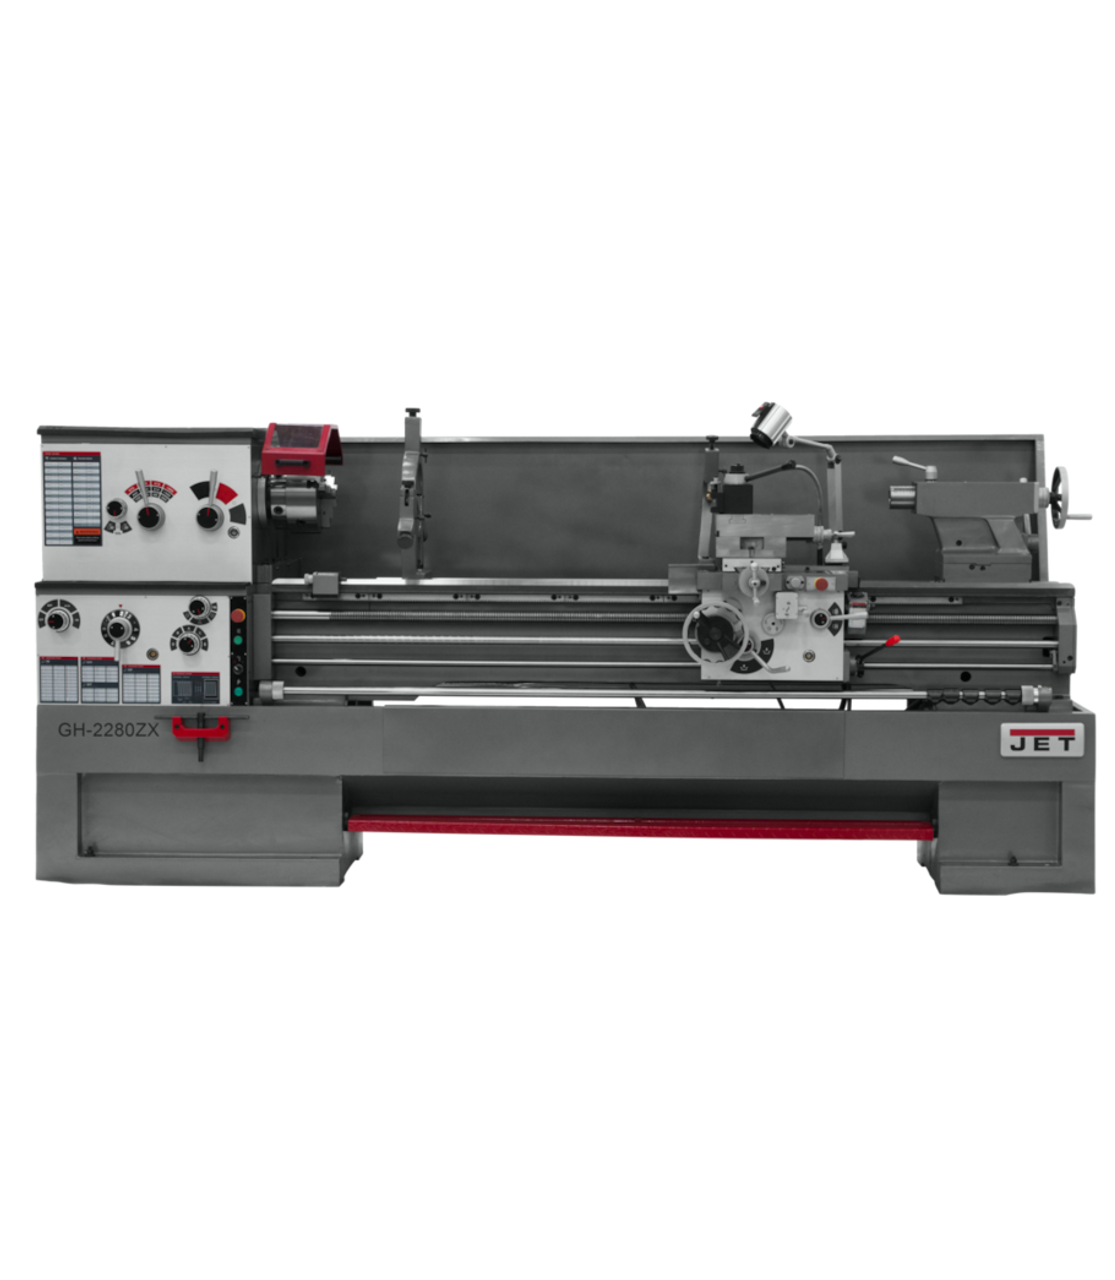 JET GH-2280ZX Large Spindle Bore Lathe with Taper Attachment 460V